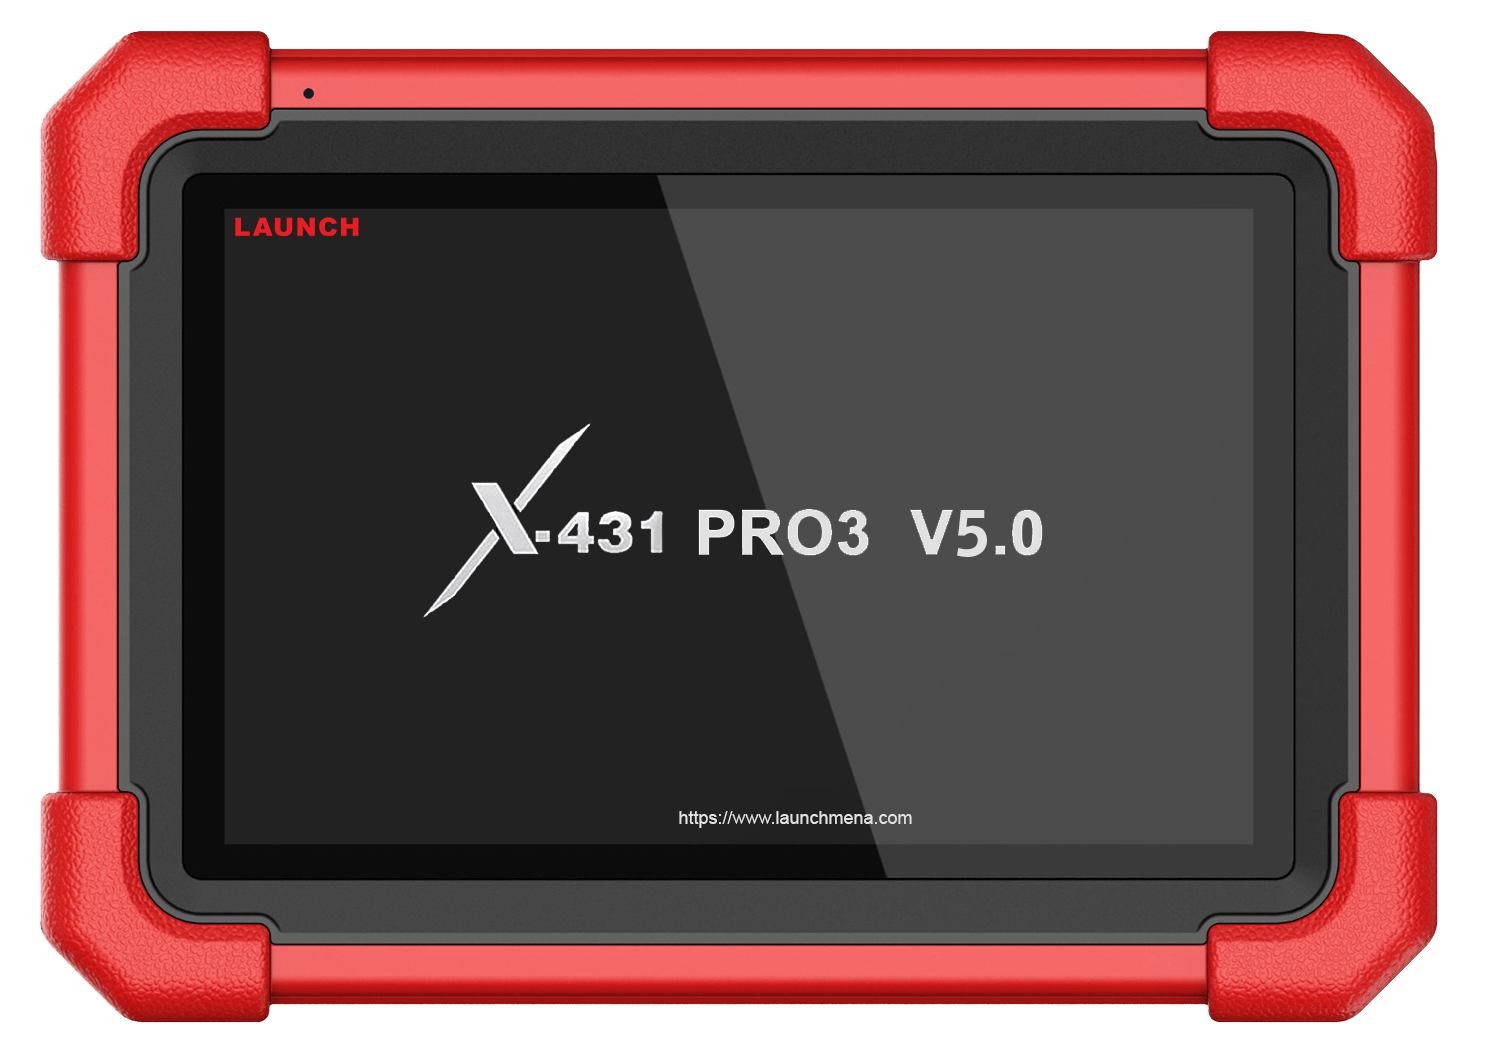 Launch X431 PRO 3 V5.0 - INTEGRATED SOLUTION TRADING